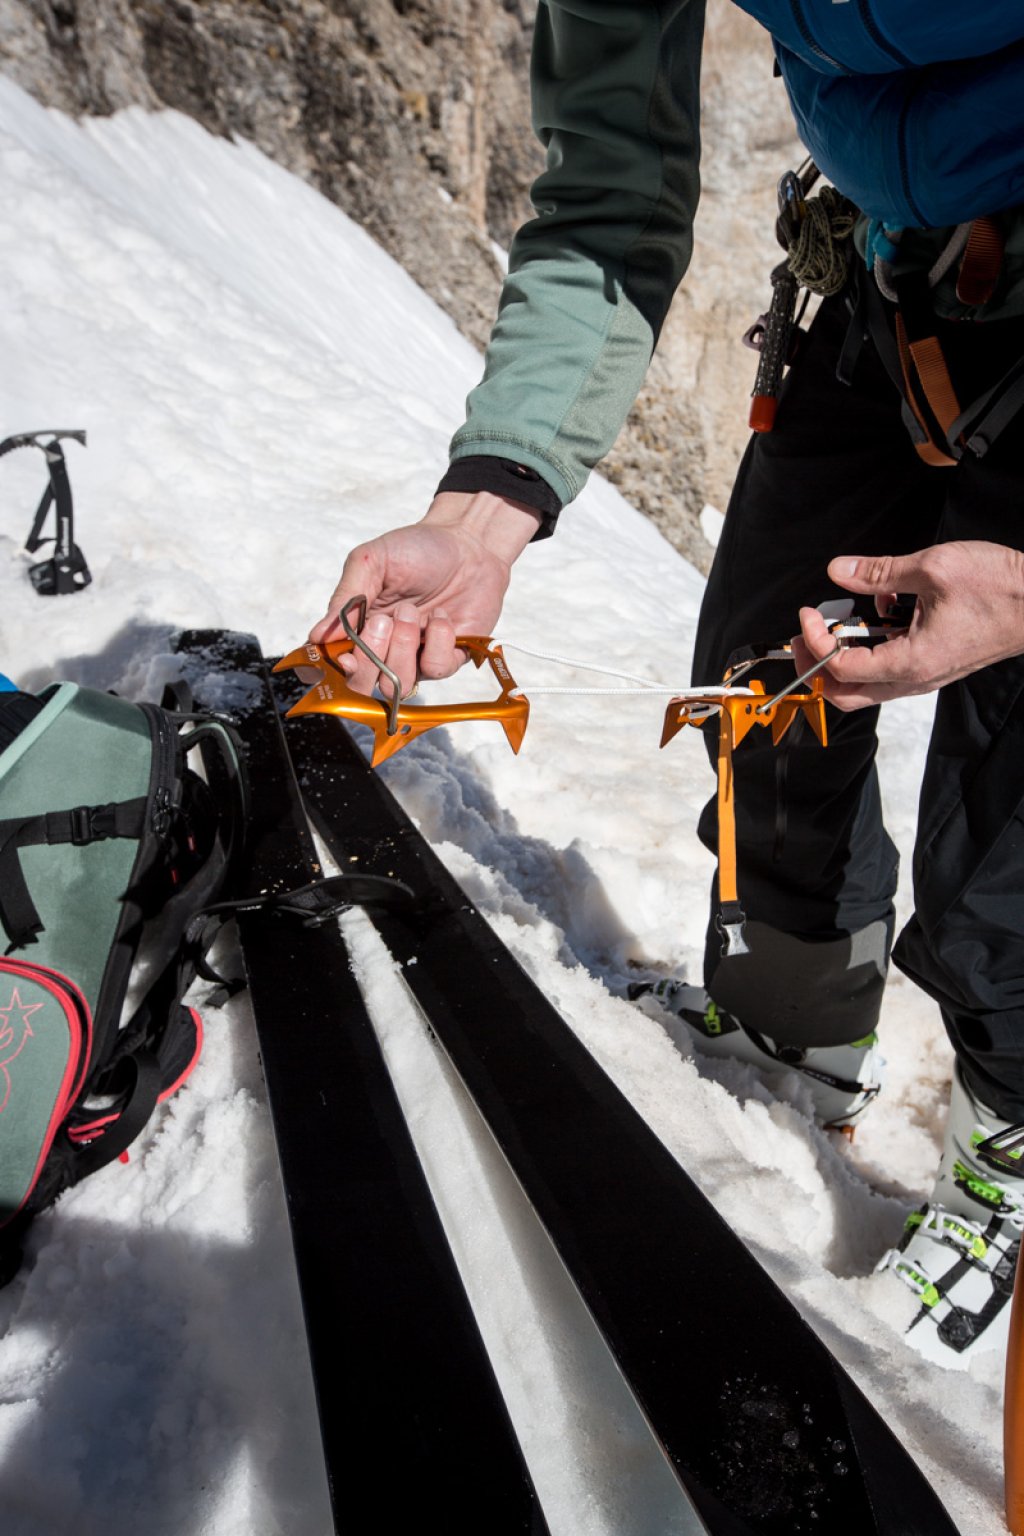 The connection between the two Dyneema crampon parts